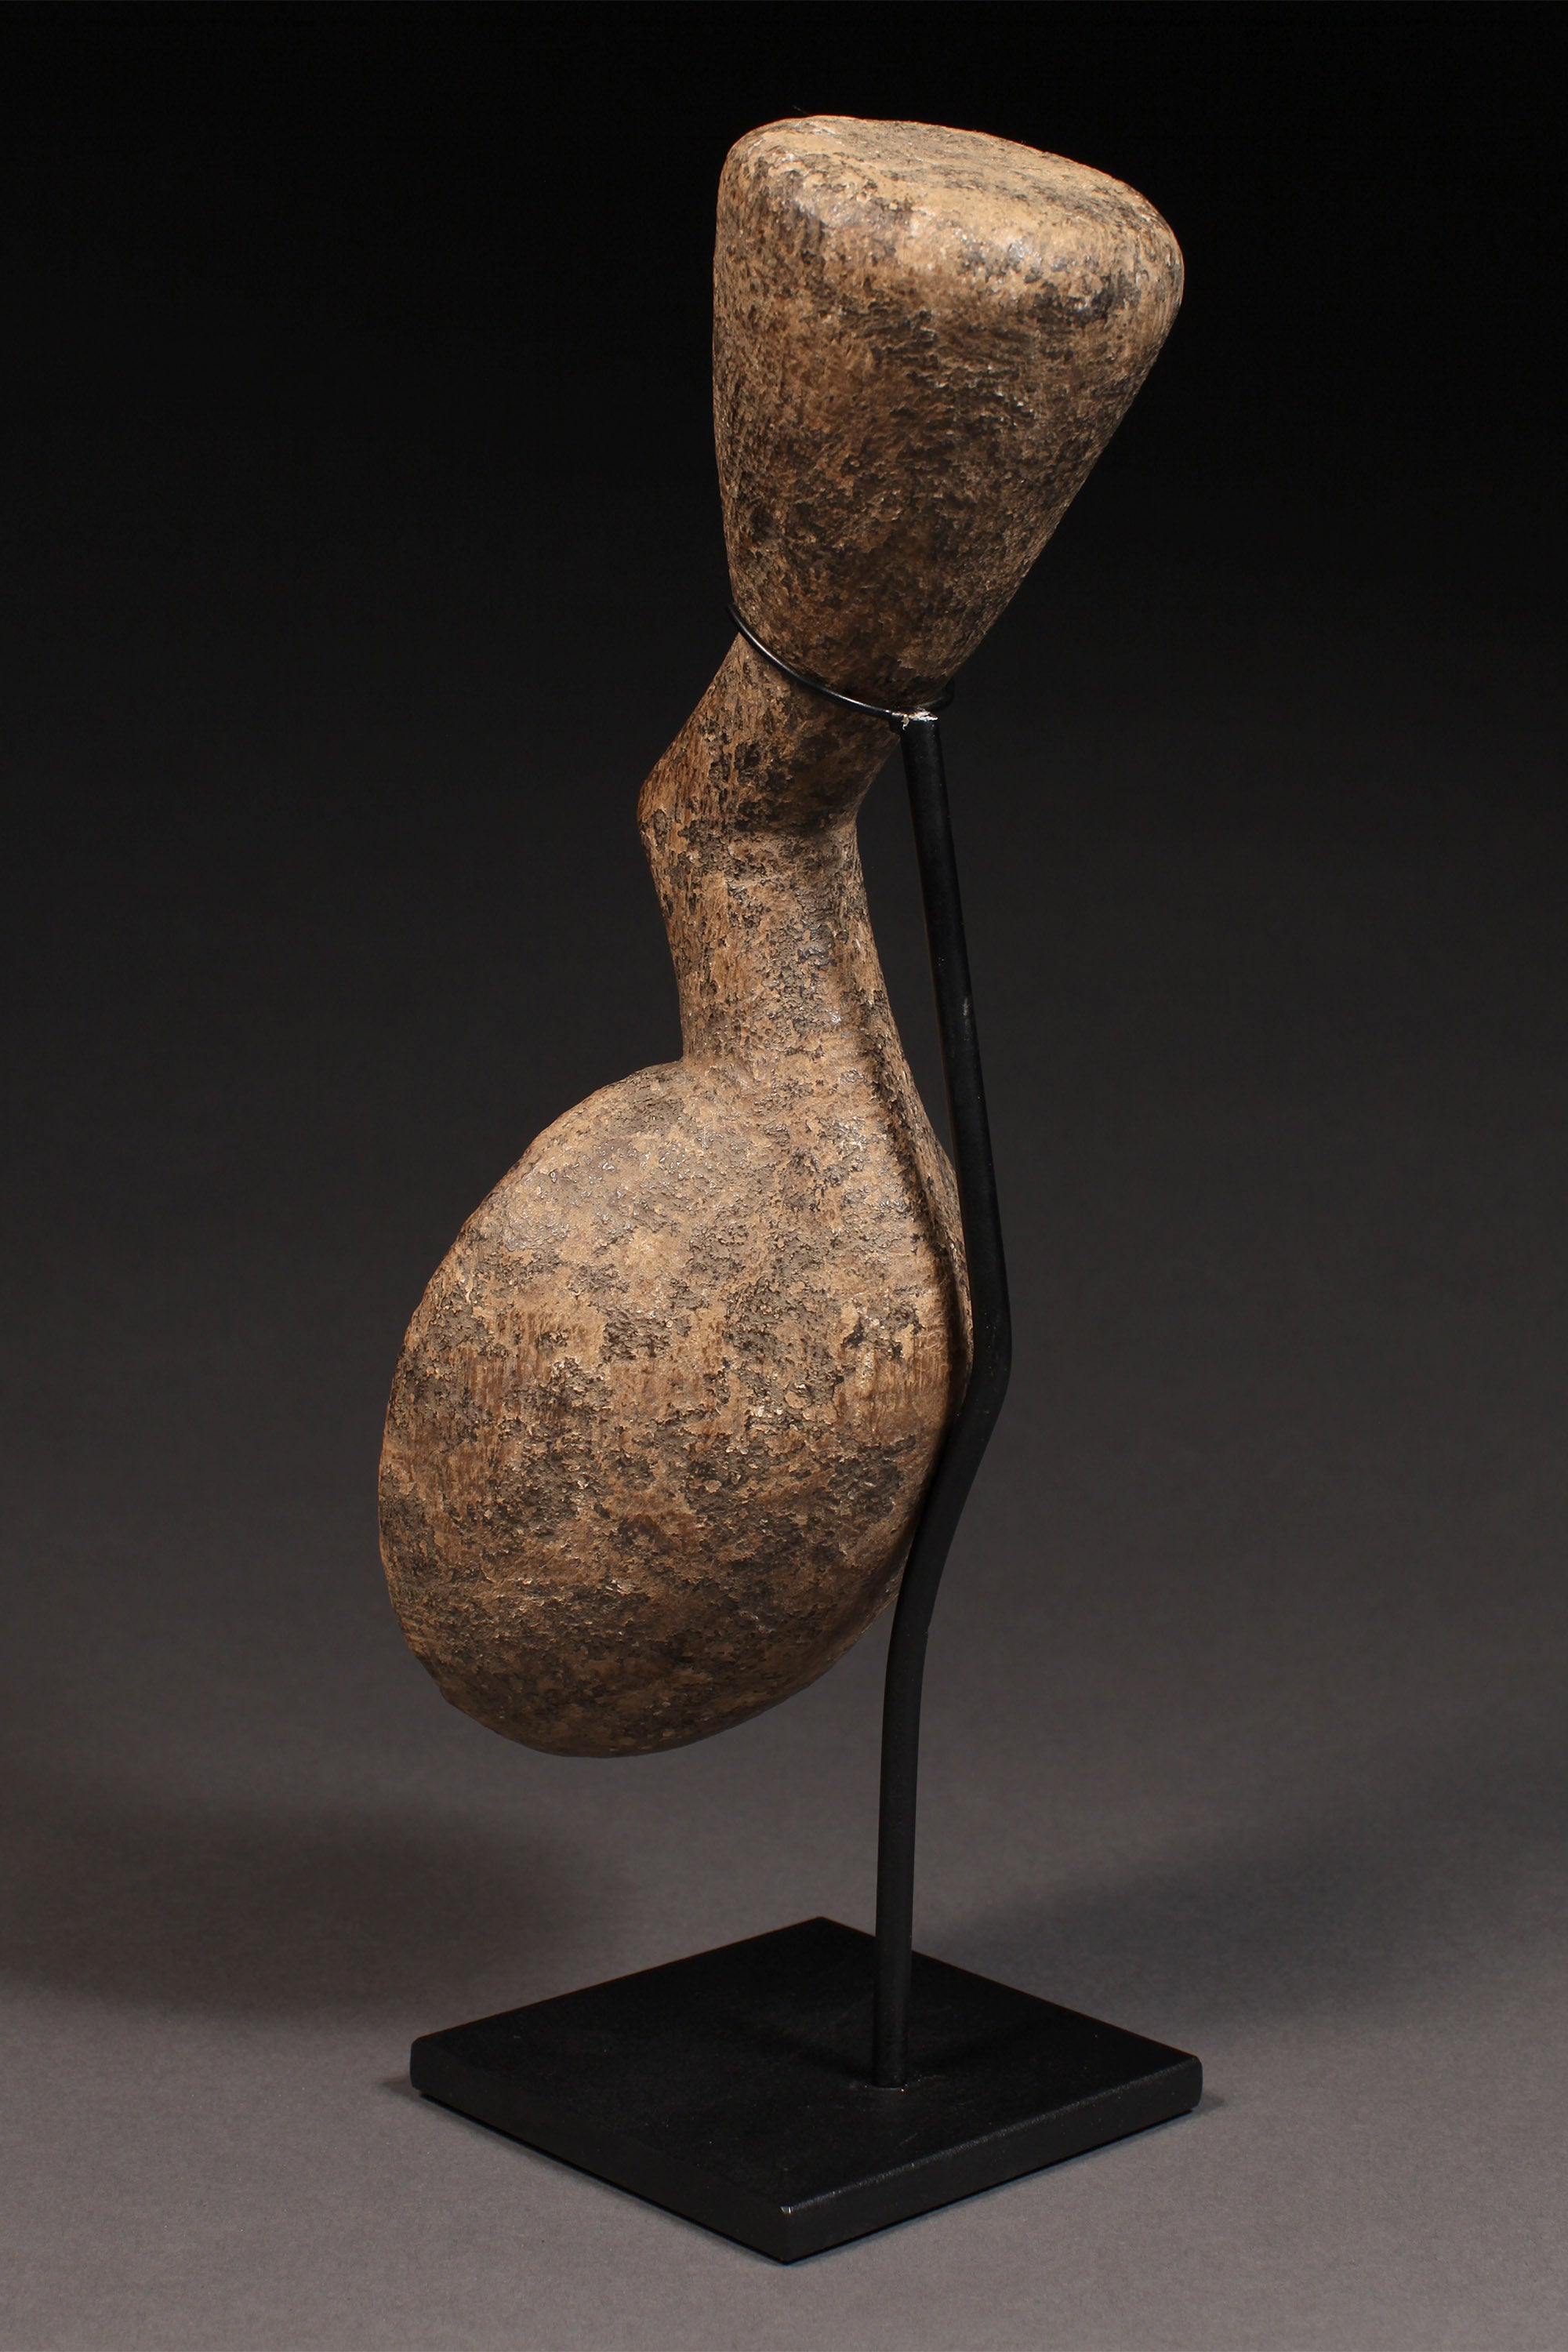 Tribal Objects - This one-of-a-kind Geometric Ceremonial Ladle Spoon is caved from wood by the Kulango Tribe of the Ivory Coast. This unique piece is perfect for bringing an authentic, traditional touch to any home. It can be used as a collectible, decorative object, or even a sculpture. H: 11.5” (13.5